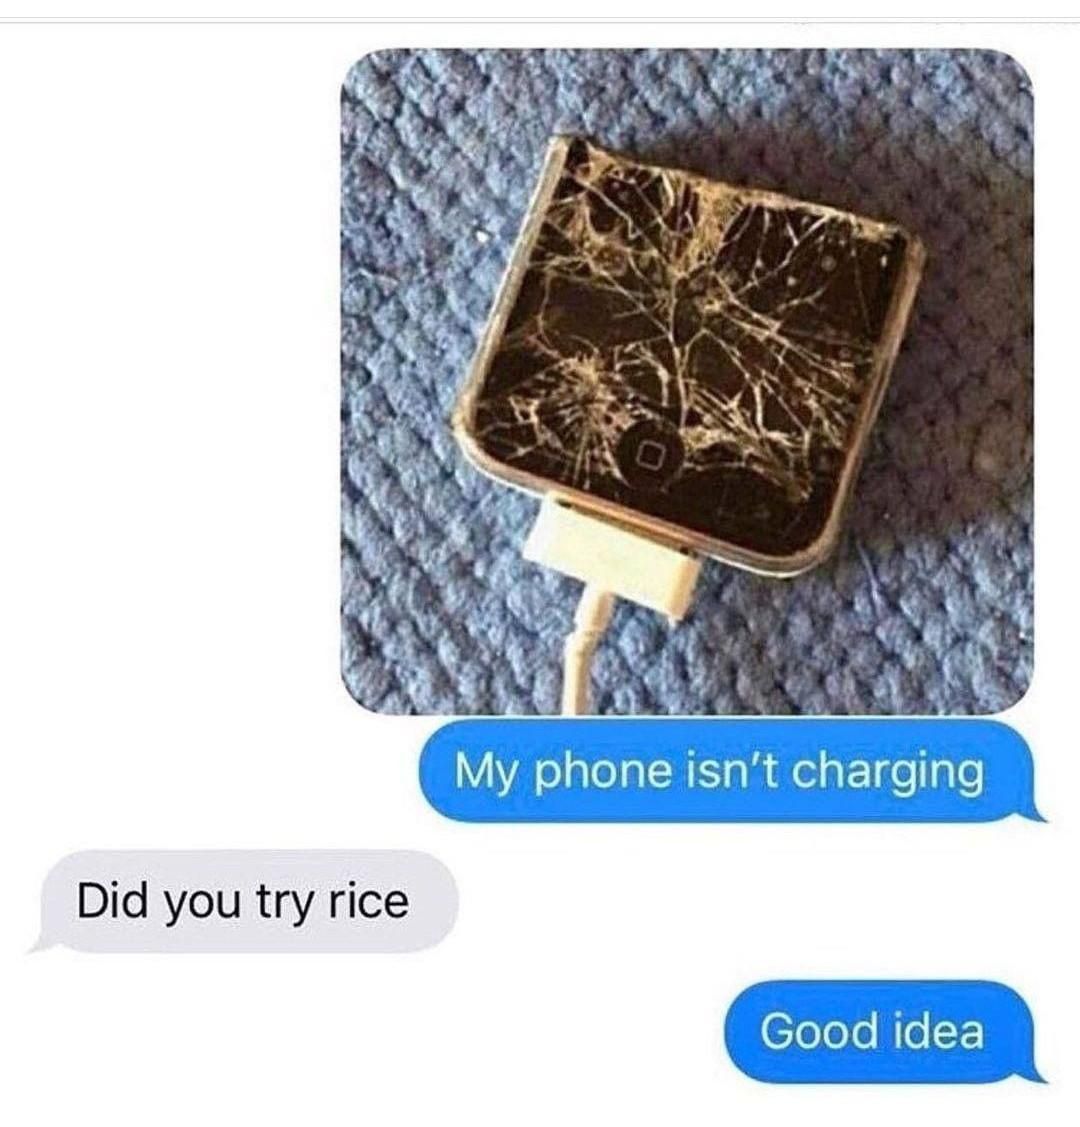 Rice is the only solution